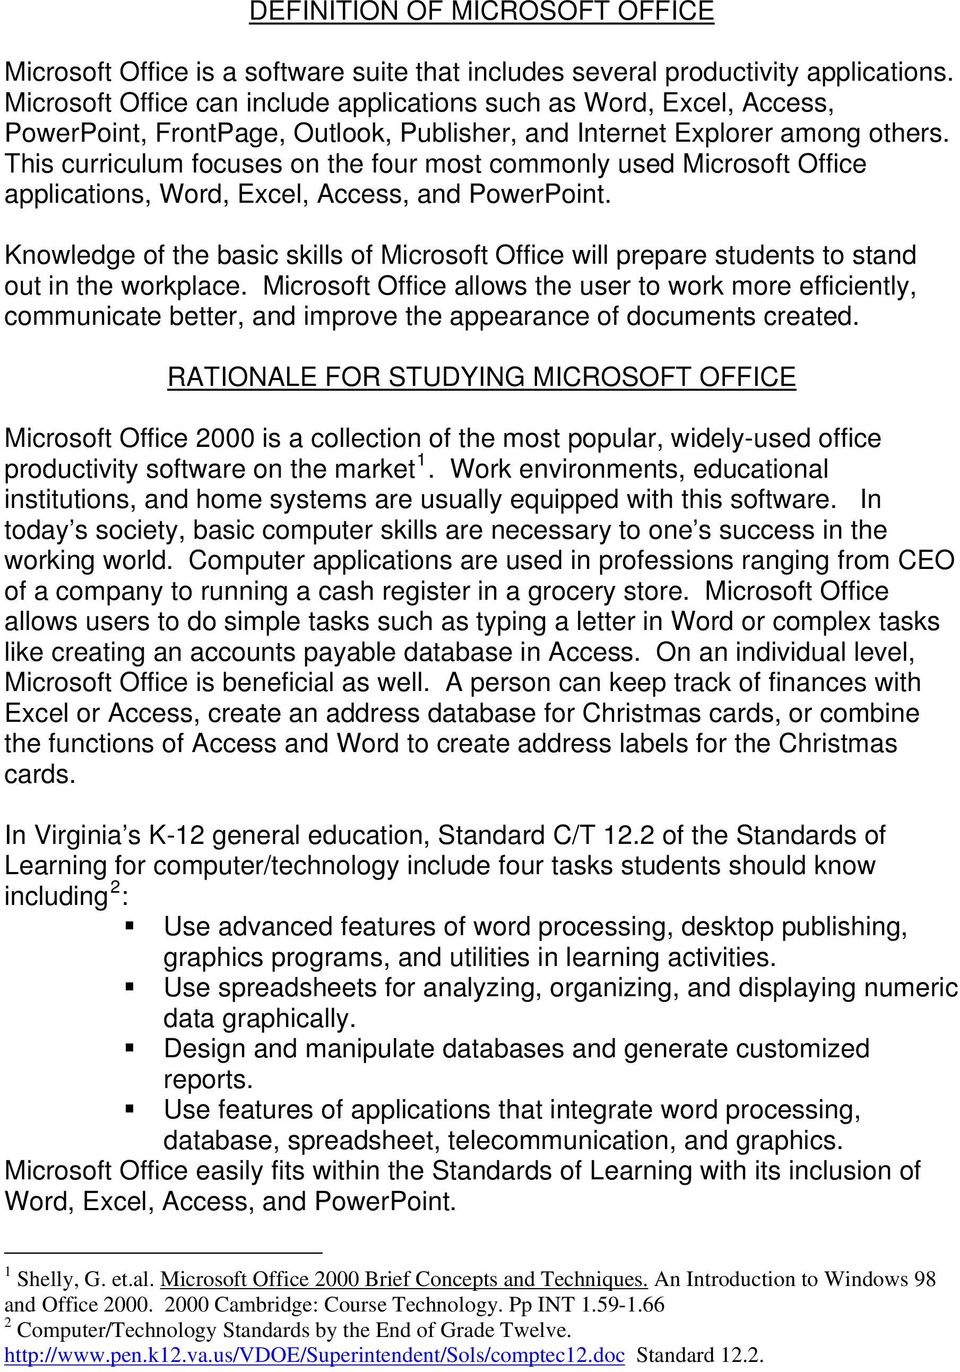 This curriculum focuses on the four most commonly used Microsoft Office applications, Word, Excel, Access, and PowerPoint.